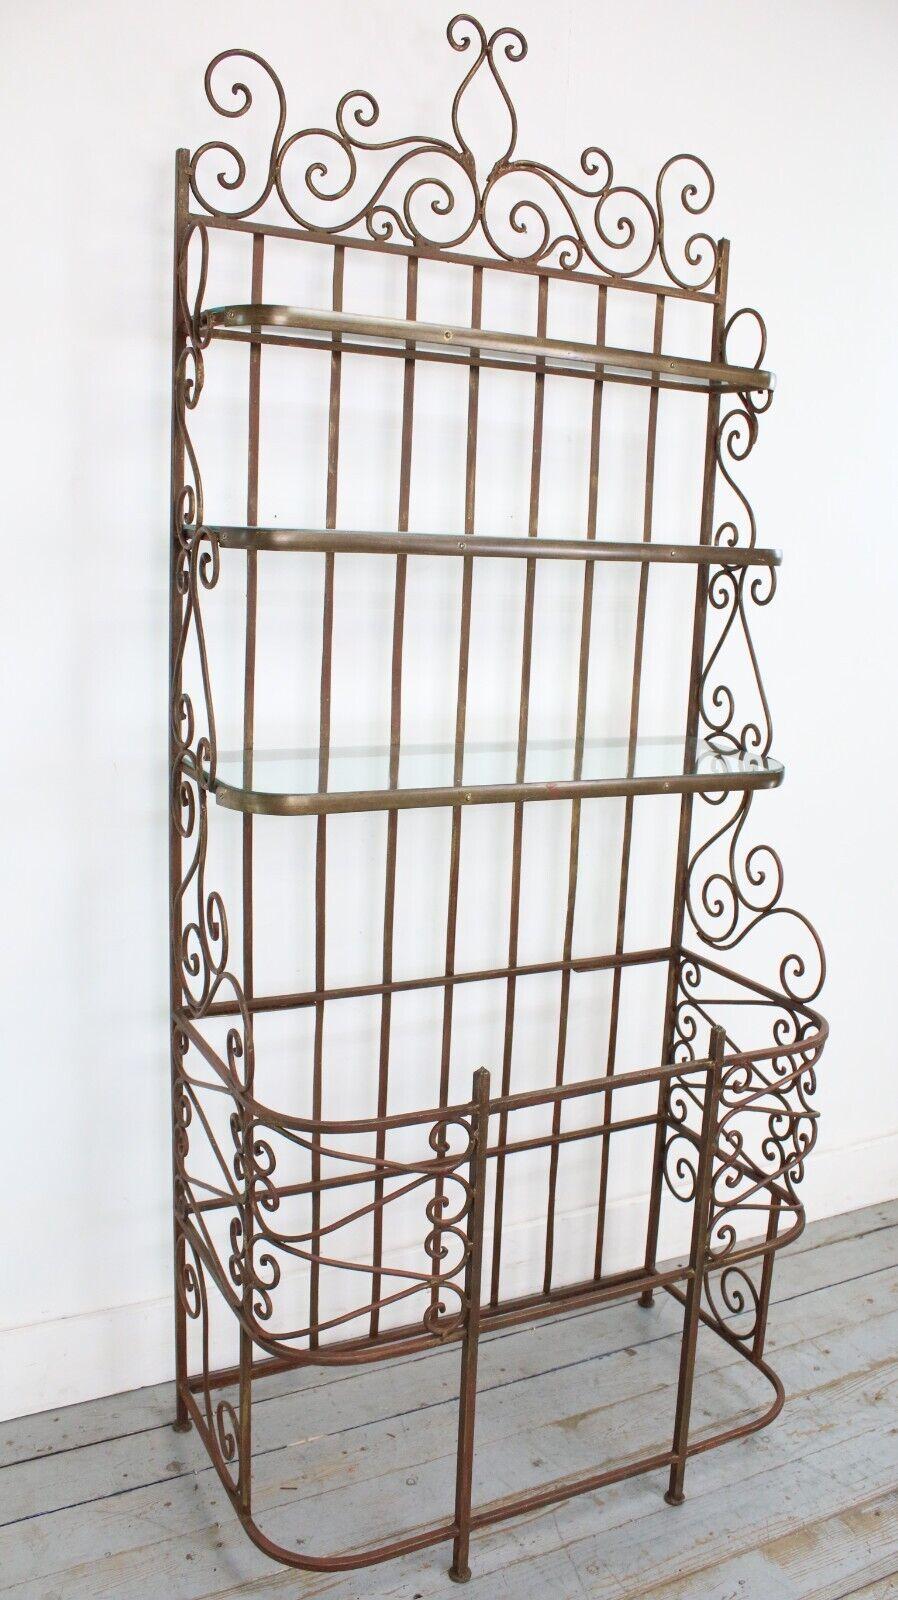 British Early 20th Century 20s Shop Retail Display Garden Feature Boulangerie Stand Rack